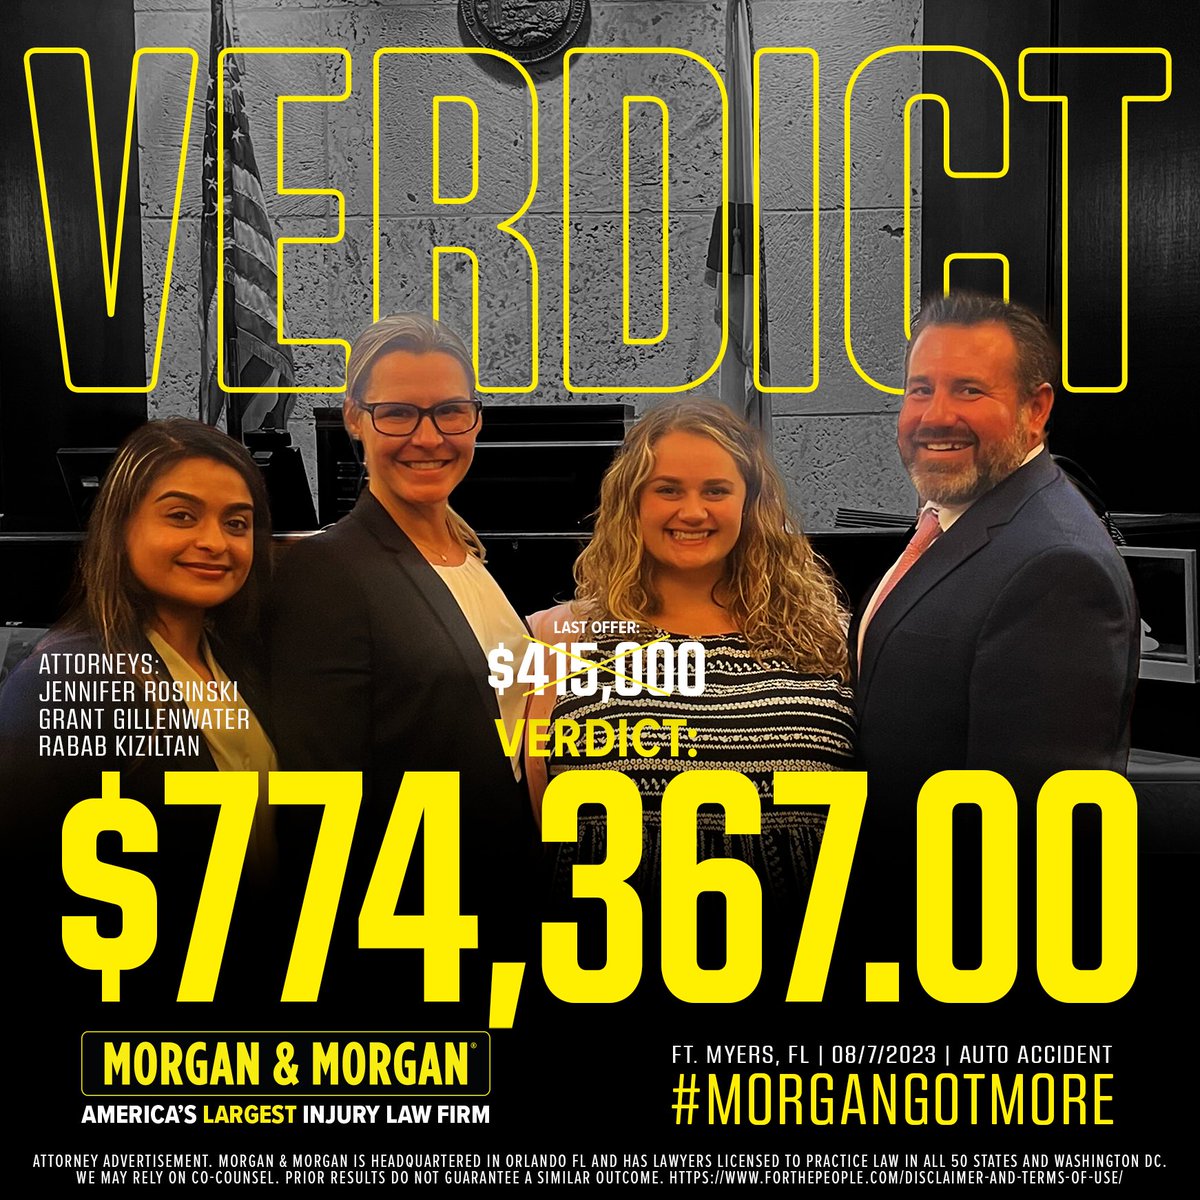 🚨#VerdictAlert:

Jennifer Rosinski, Grant Gillenwater, and Rabab Kiziltan just received a $774,367.00 verdict for our client in Fort Myers, FL!

Proud of our attorneys for always advocating #ForThePeople 💪

#MorganGotMore #MorganMath #LAW